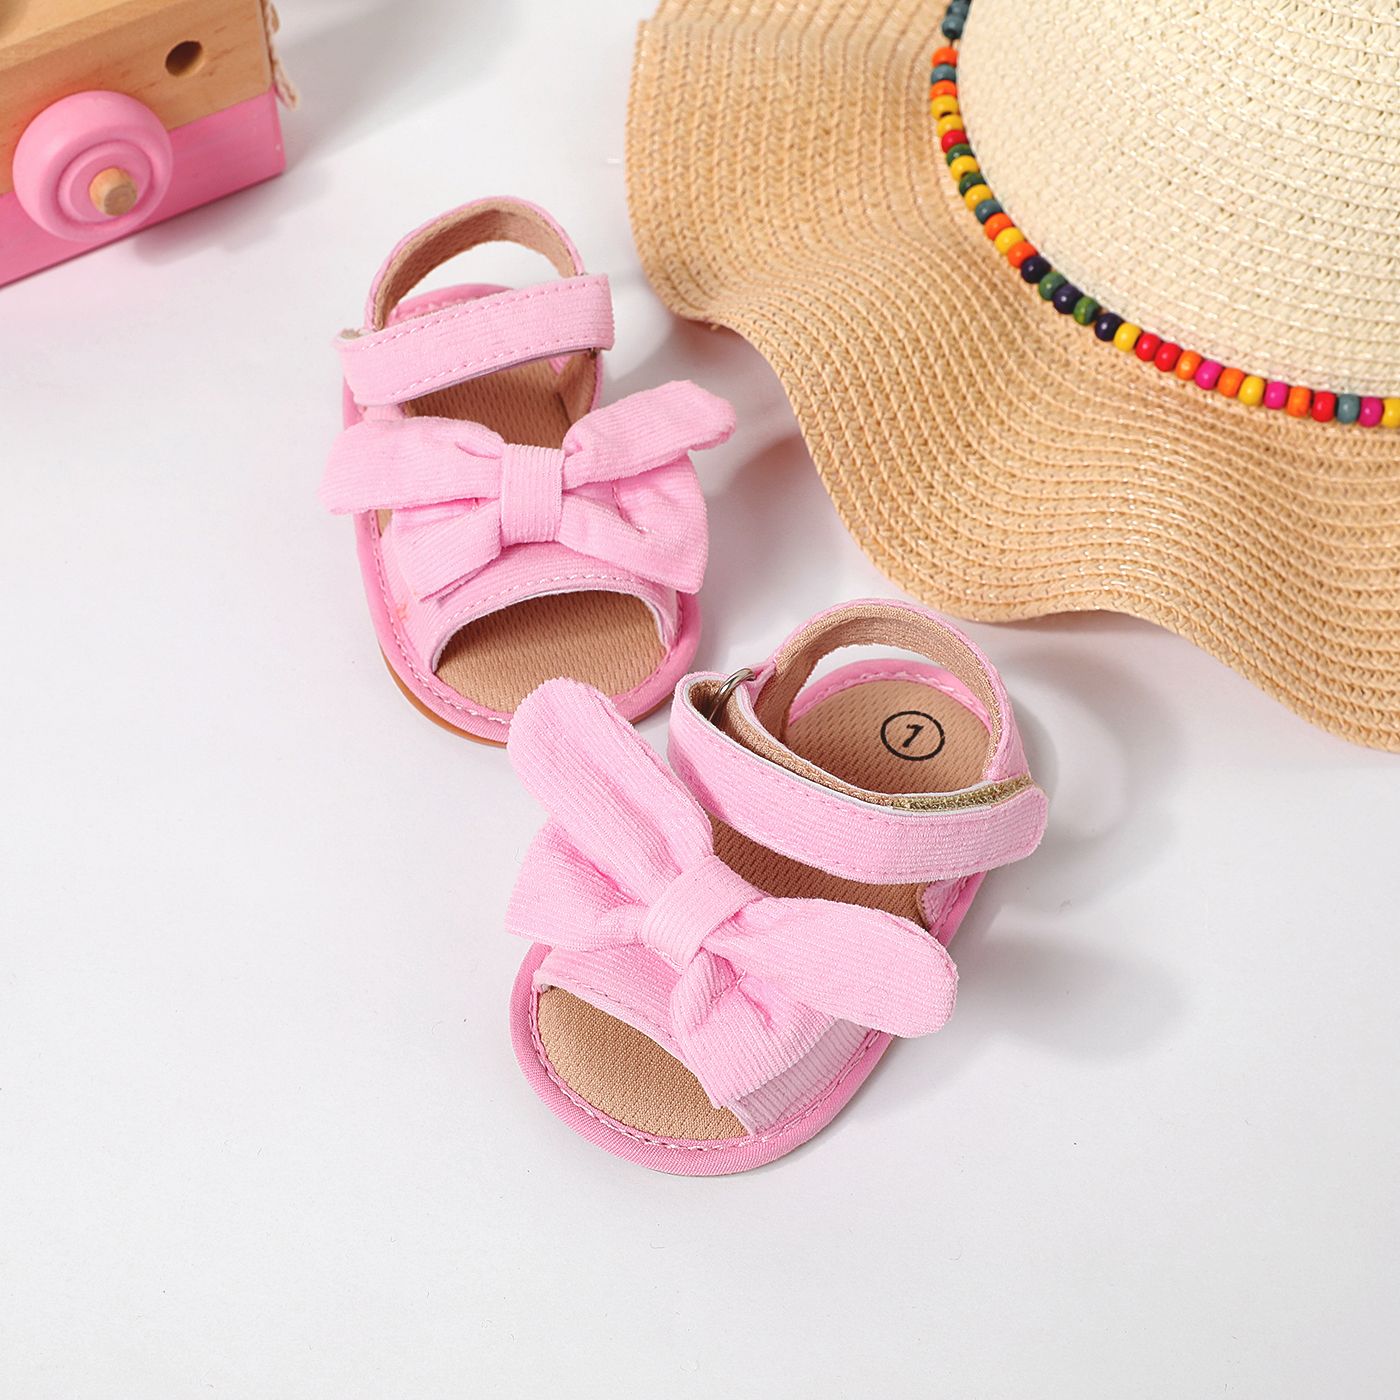 Baby/Toddler Bow Decor Soft Sole Toddler Sandals